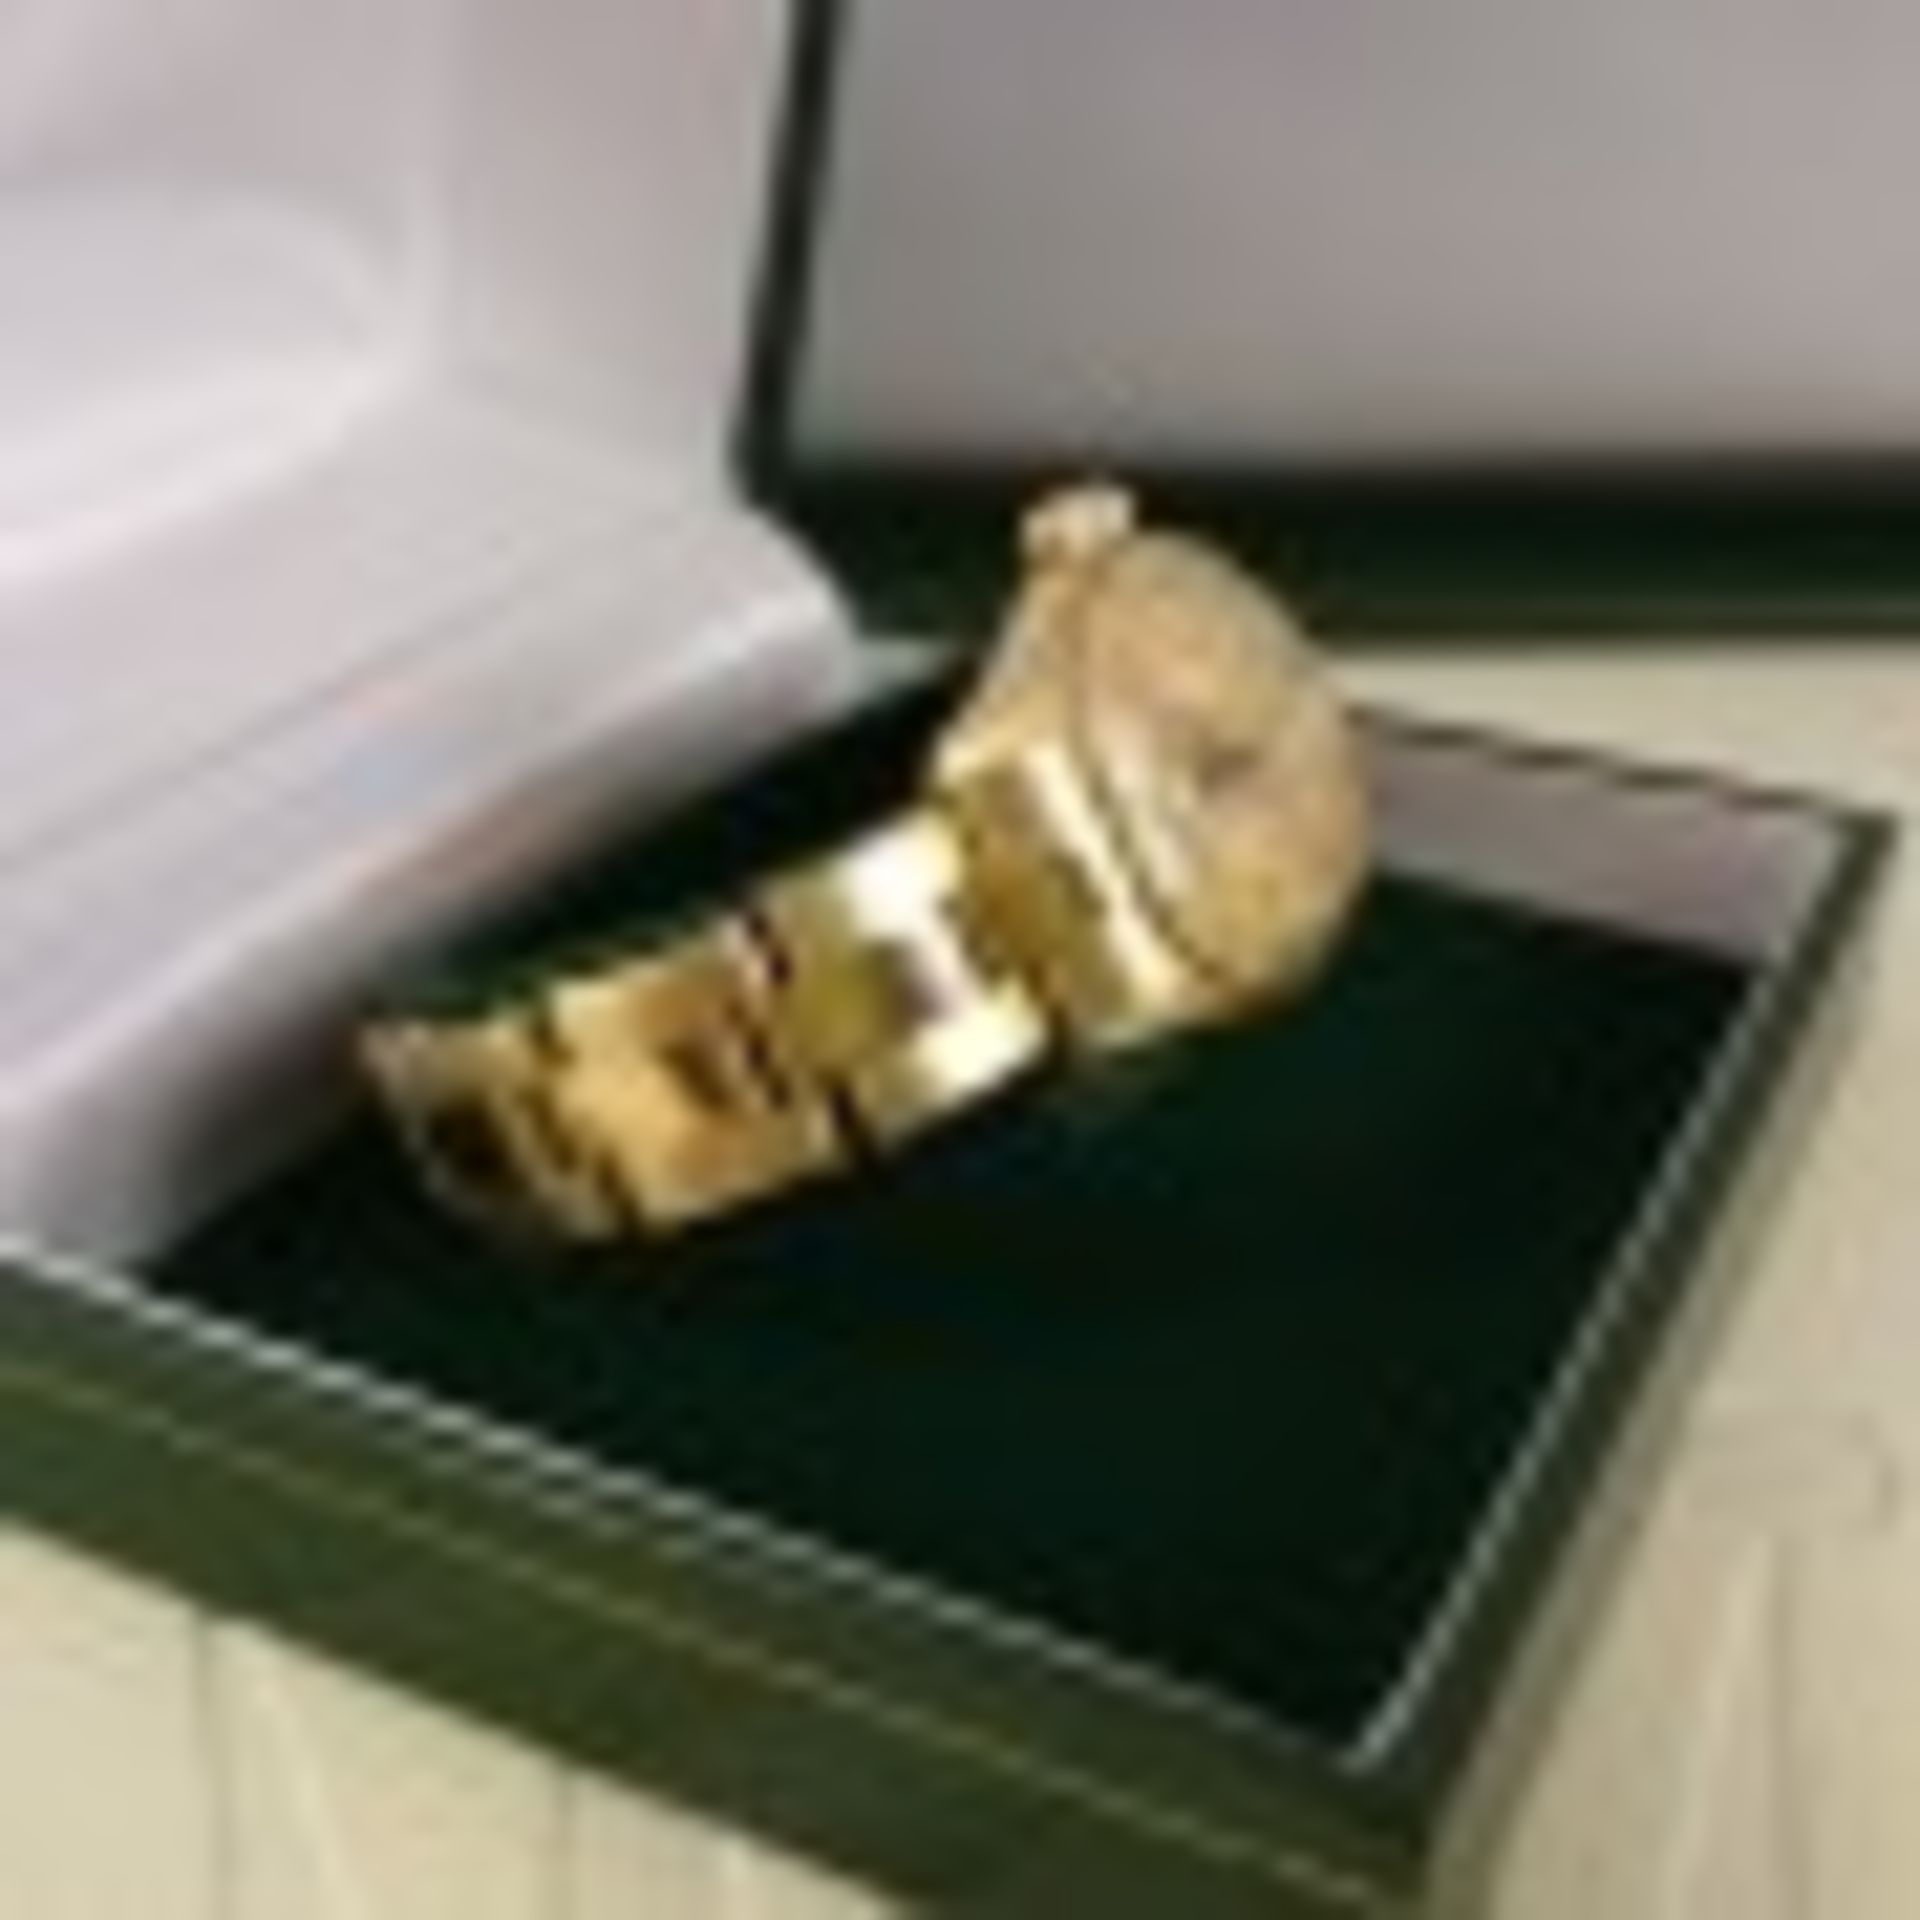 18ct GOLD ROLEX OYSTER PERPETUAL WATCH - Image 2 of 3